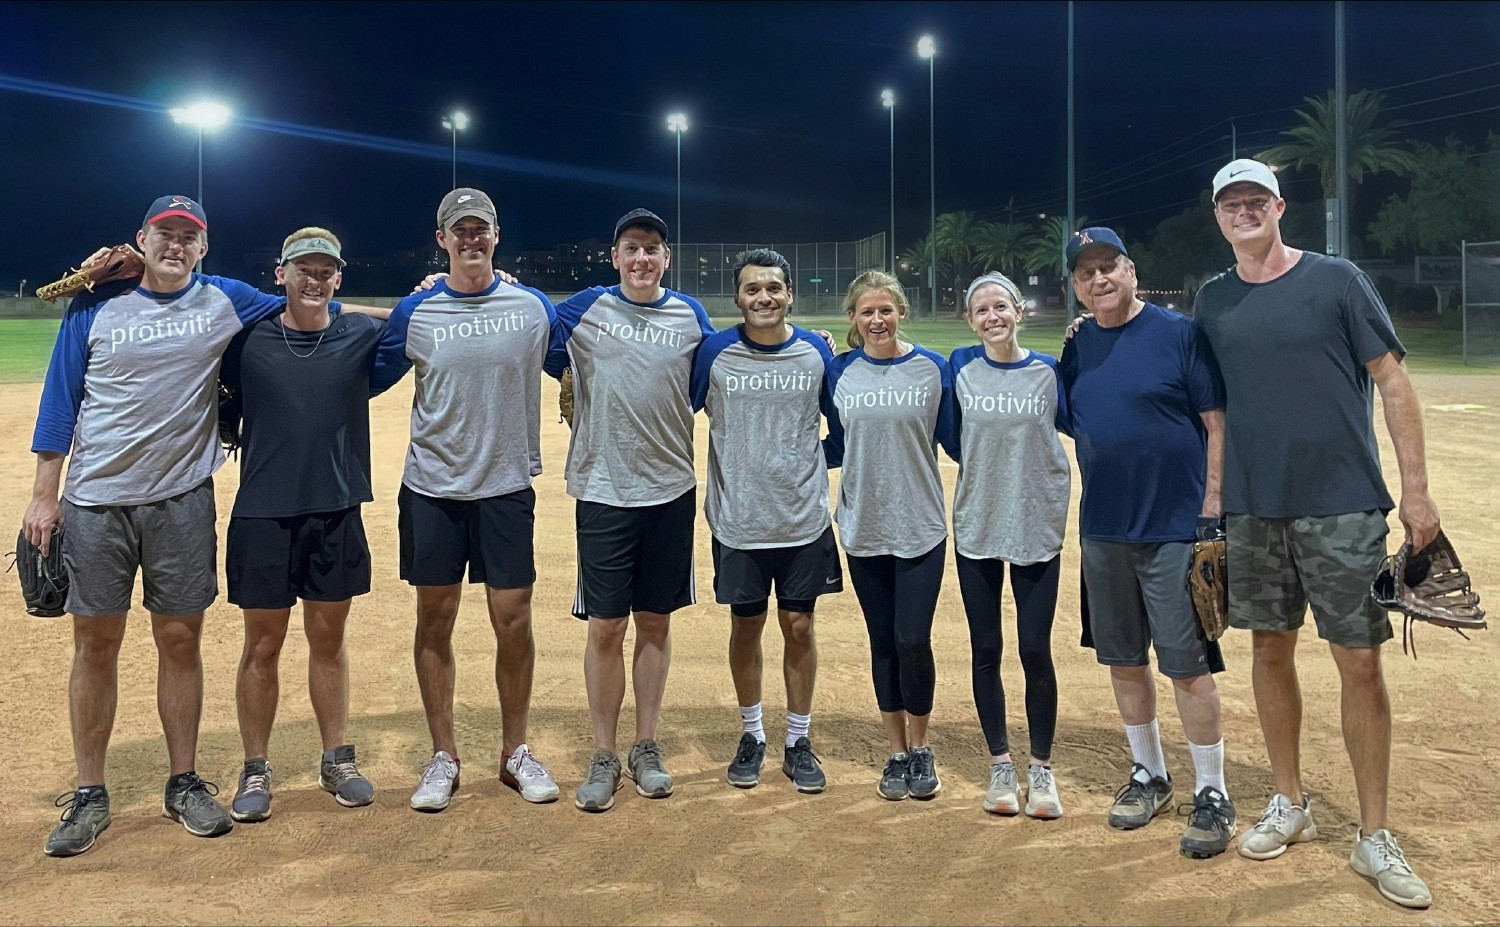 Our people enjoy teaming up outside of work hours also – like at this softball event.